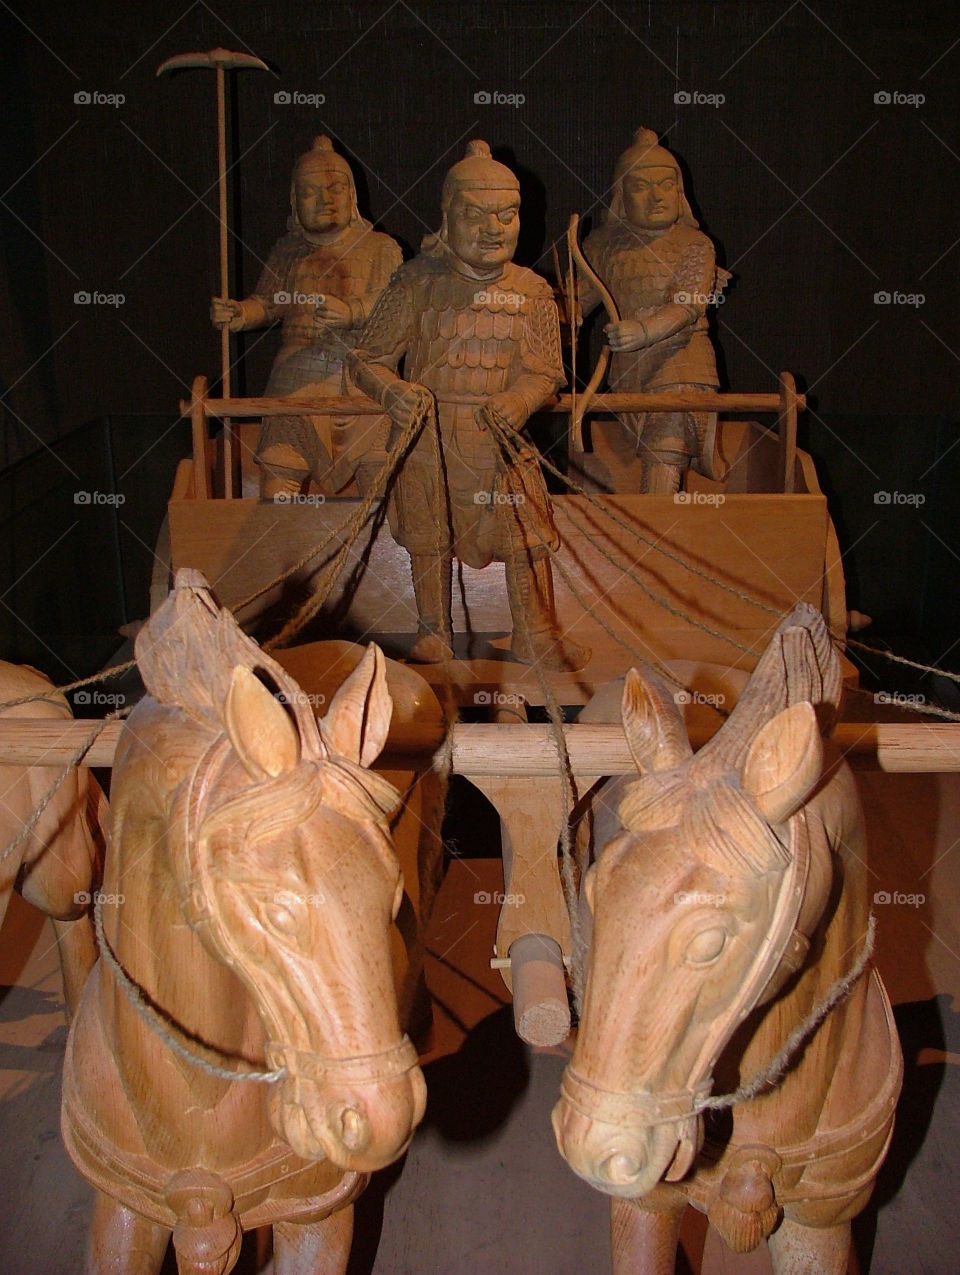 Terracotta army in wood. Chinese museum piece